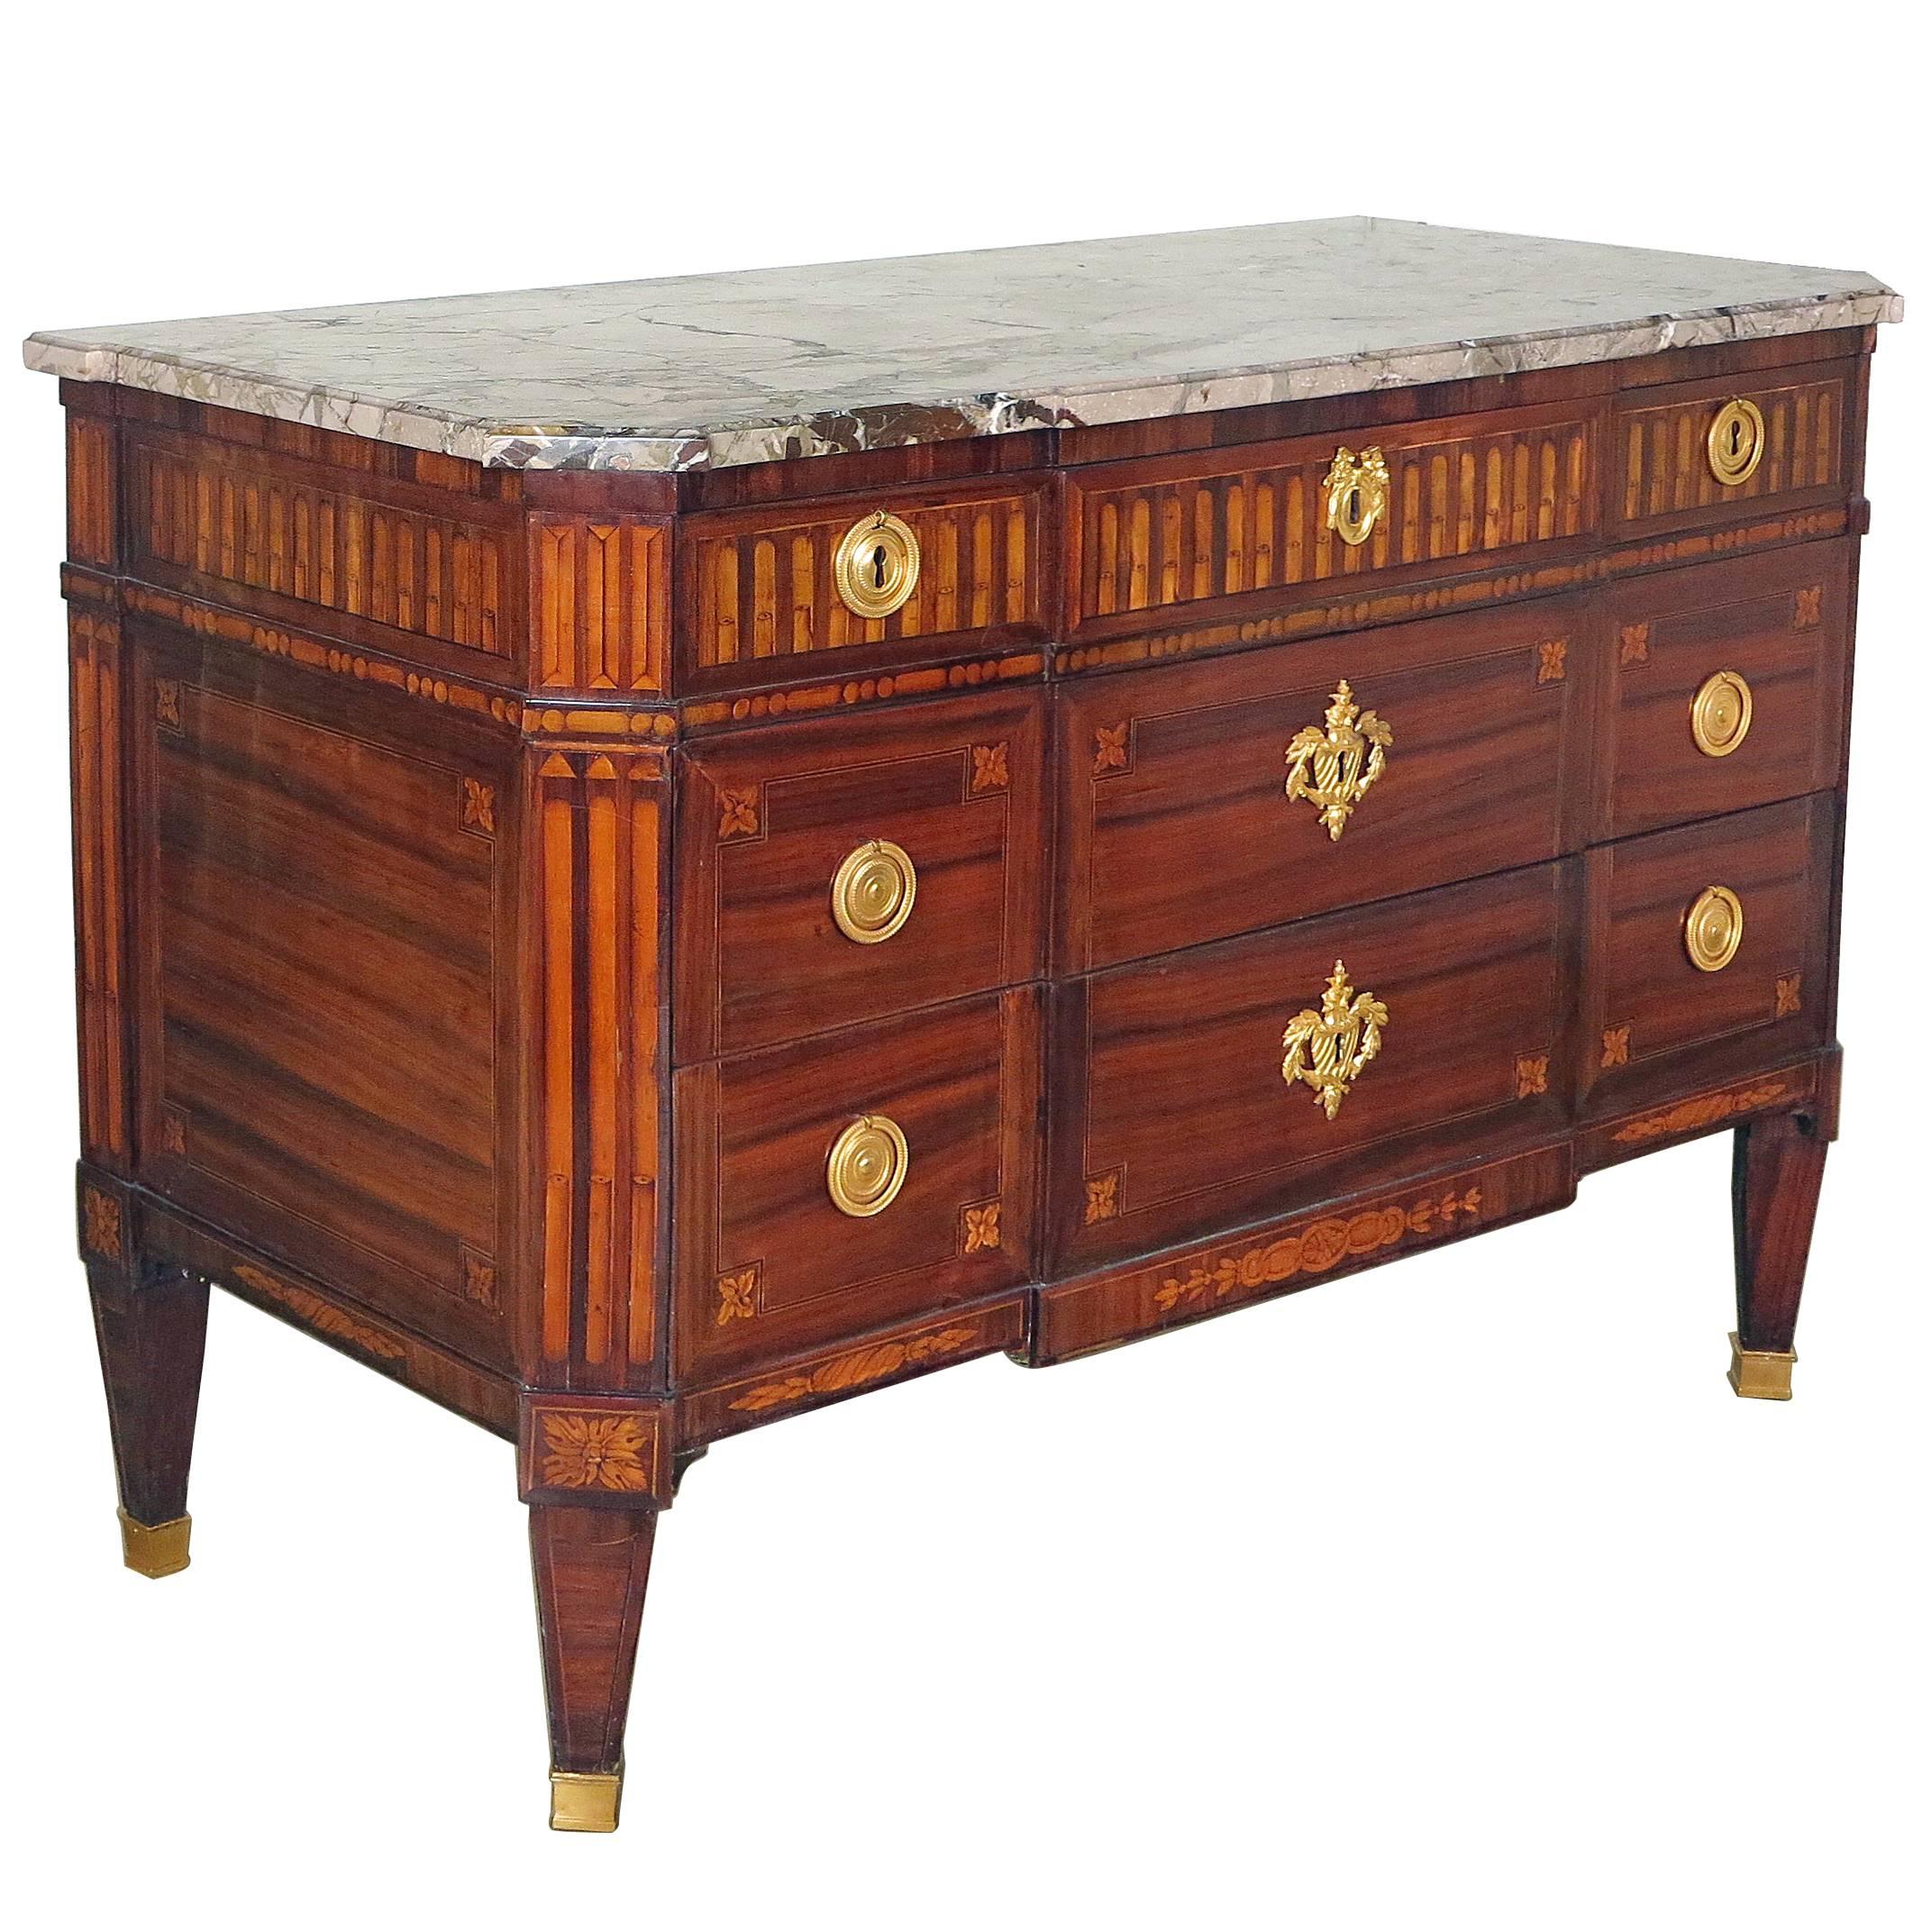 A Fine Louis XVI Kingwood with Tulipwood & Purplewood Inlaid Commode by Crepi